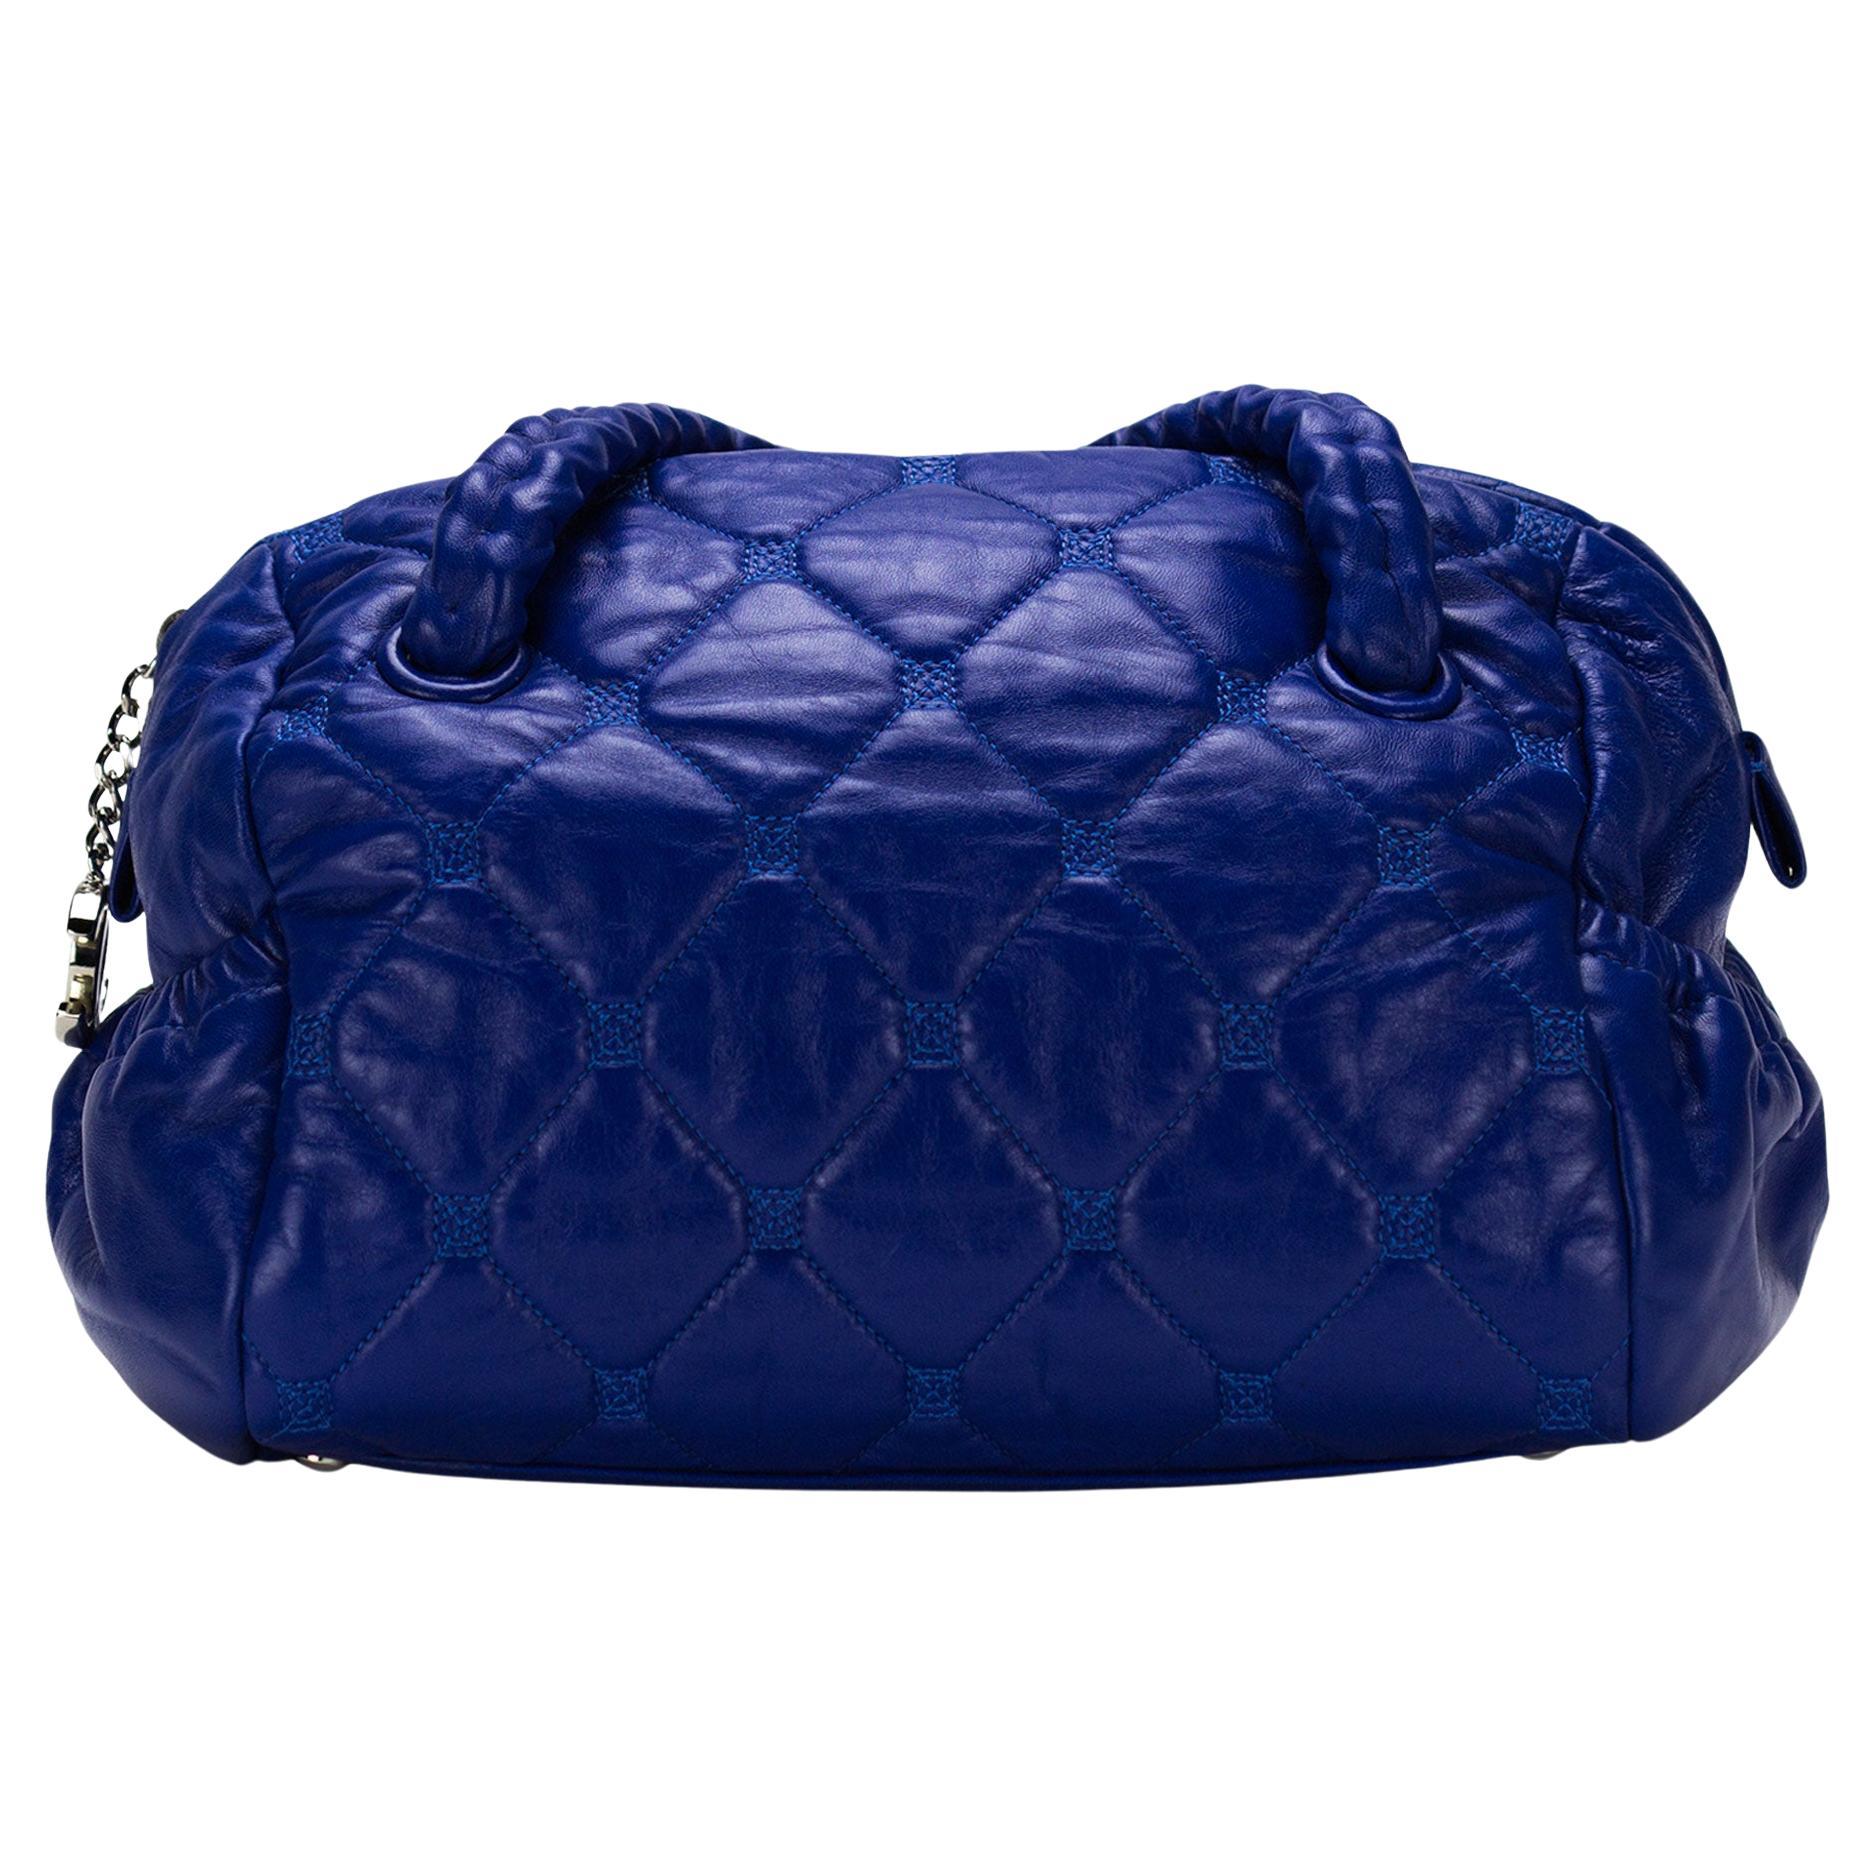 Chanel 2008 Royal Blue Top Handle Small Bowler Tote Stitched Lambskin Bag  In Good Condition For Sale In Miami, FL